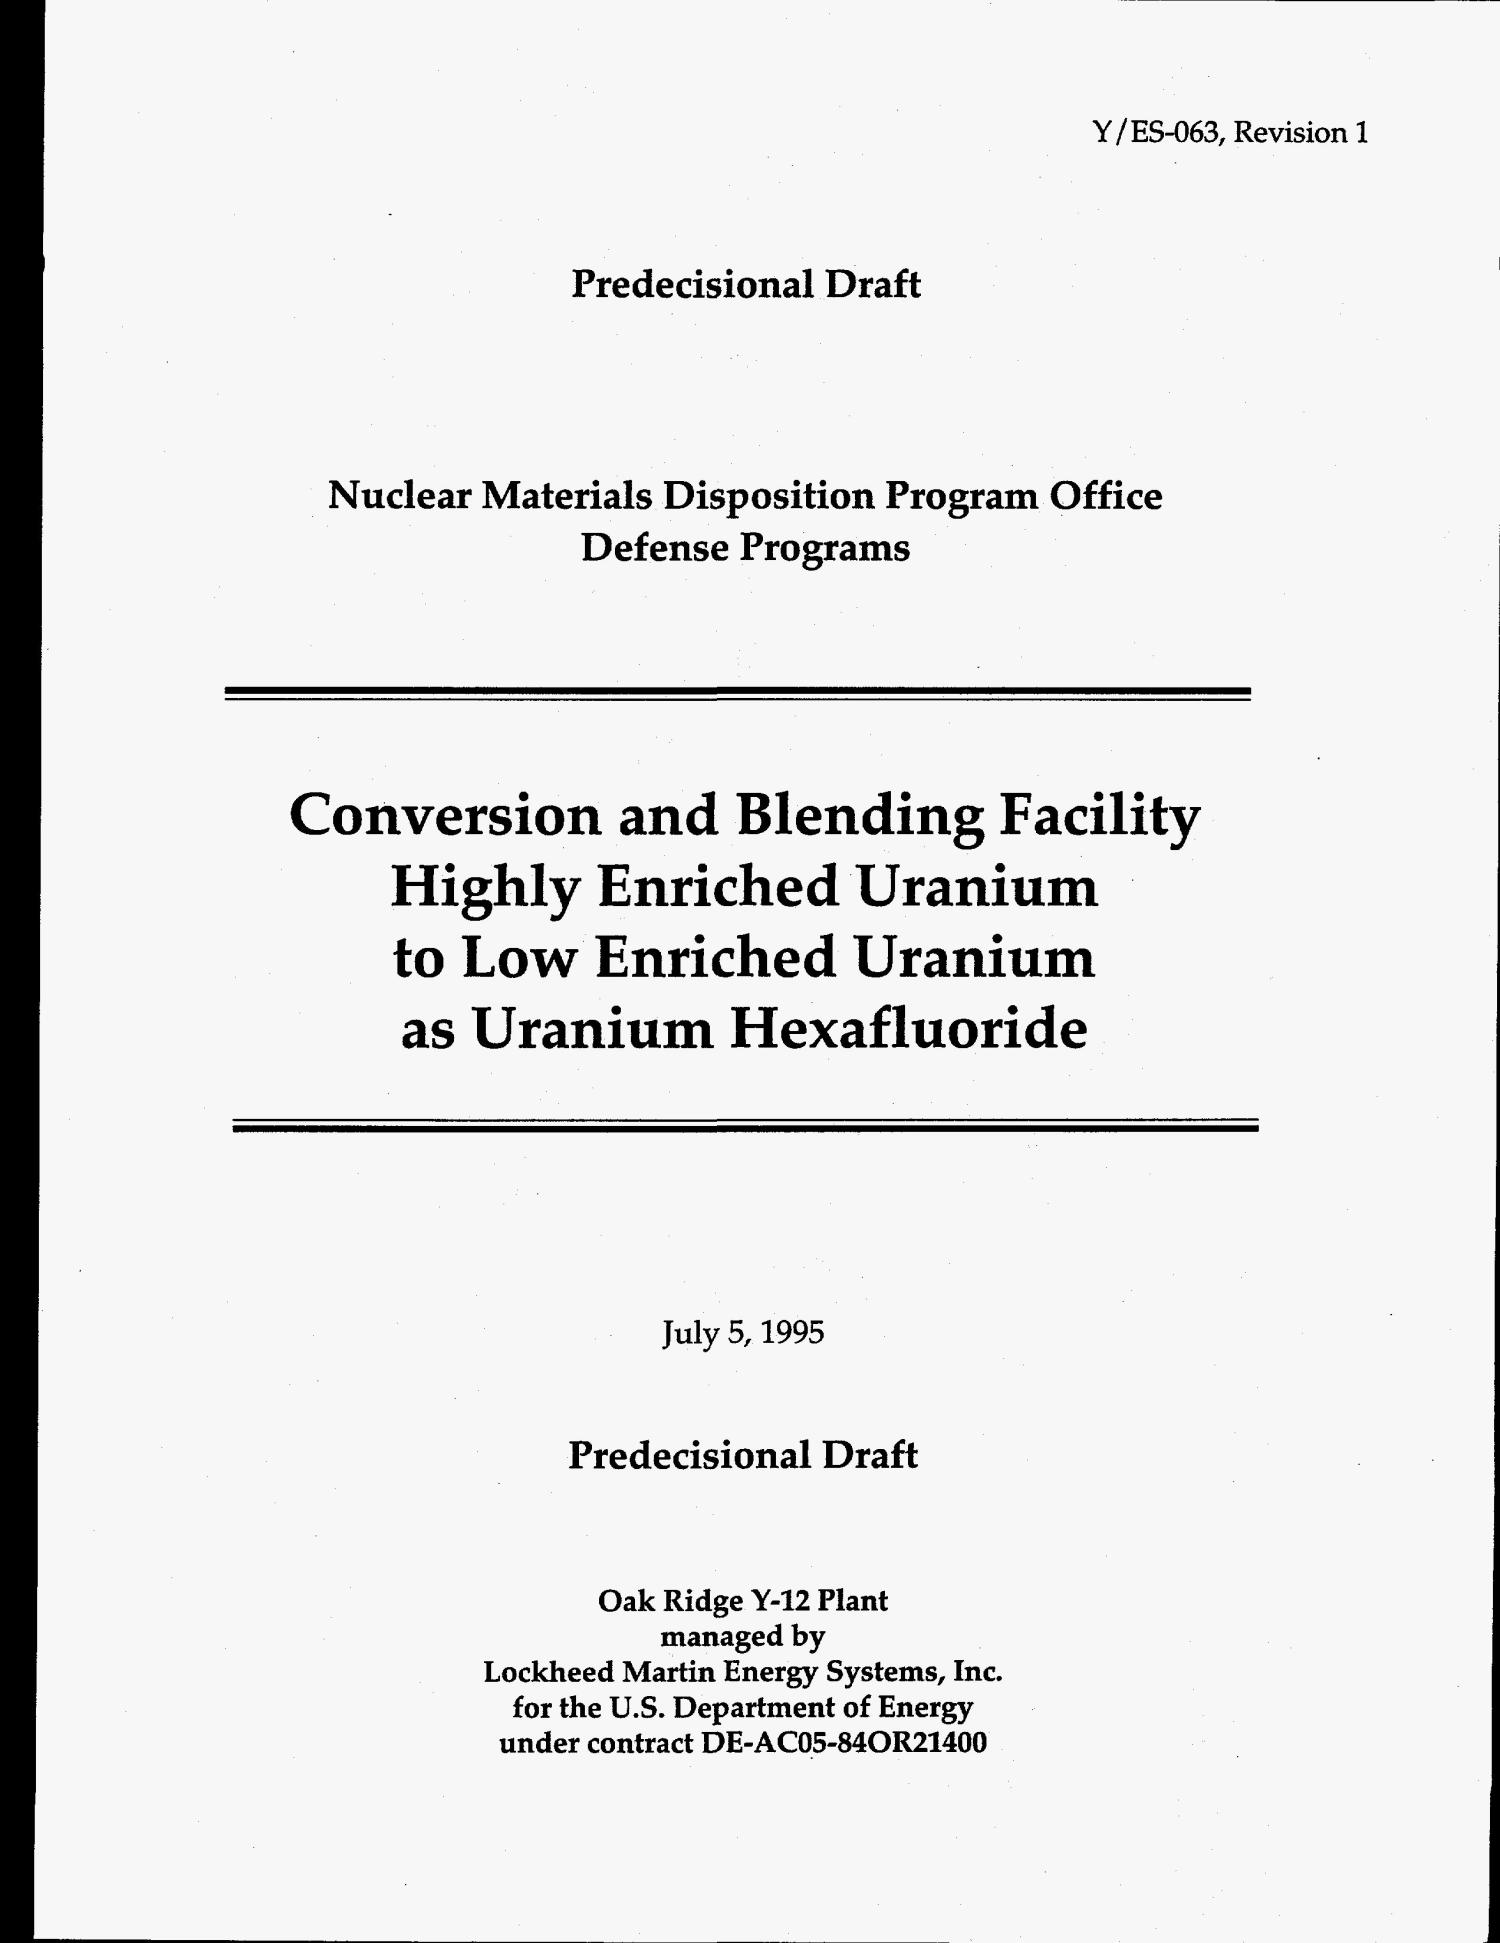 Conversion and Blending Facility Highly enriched uranium to low enriched uranium as uranium hexafluoride. Revision 1
                                                
                                                    [Sequence #]: 4 of 74
                                                